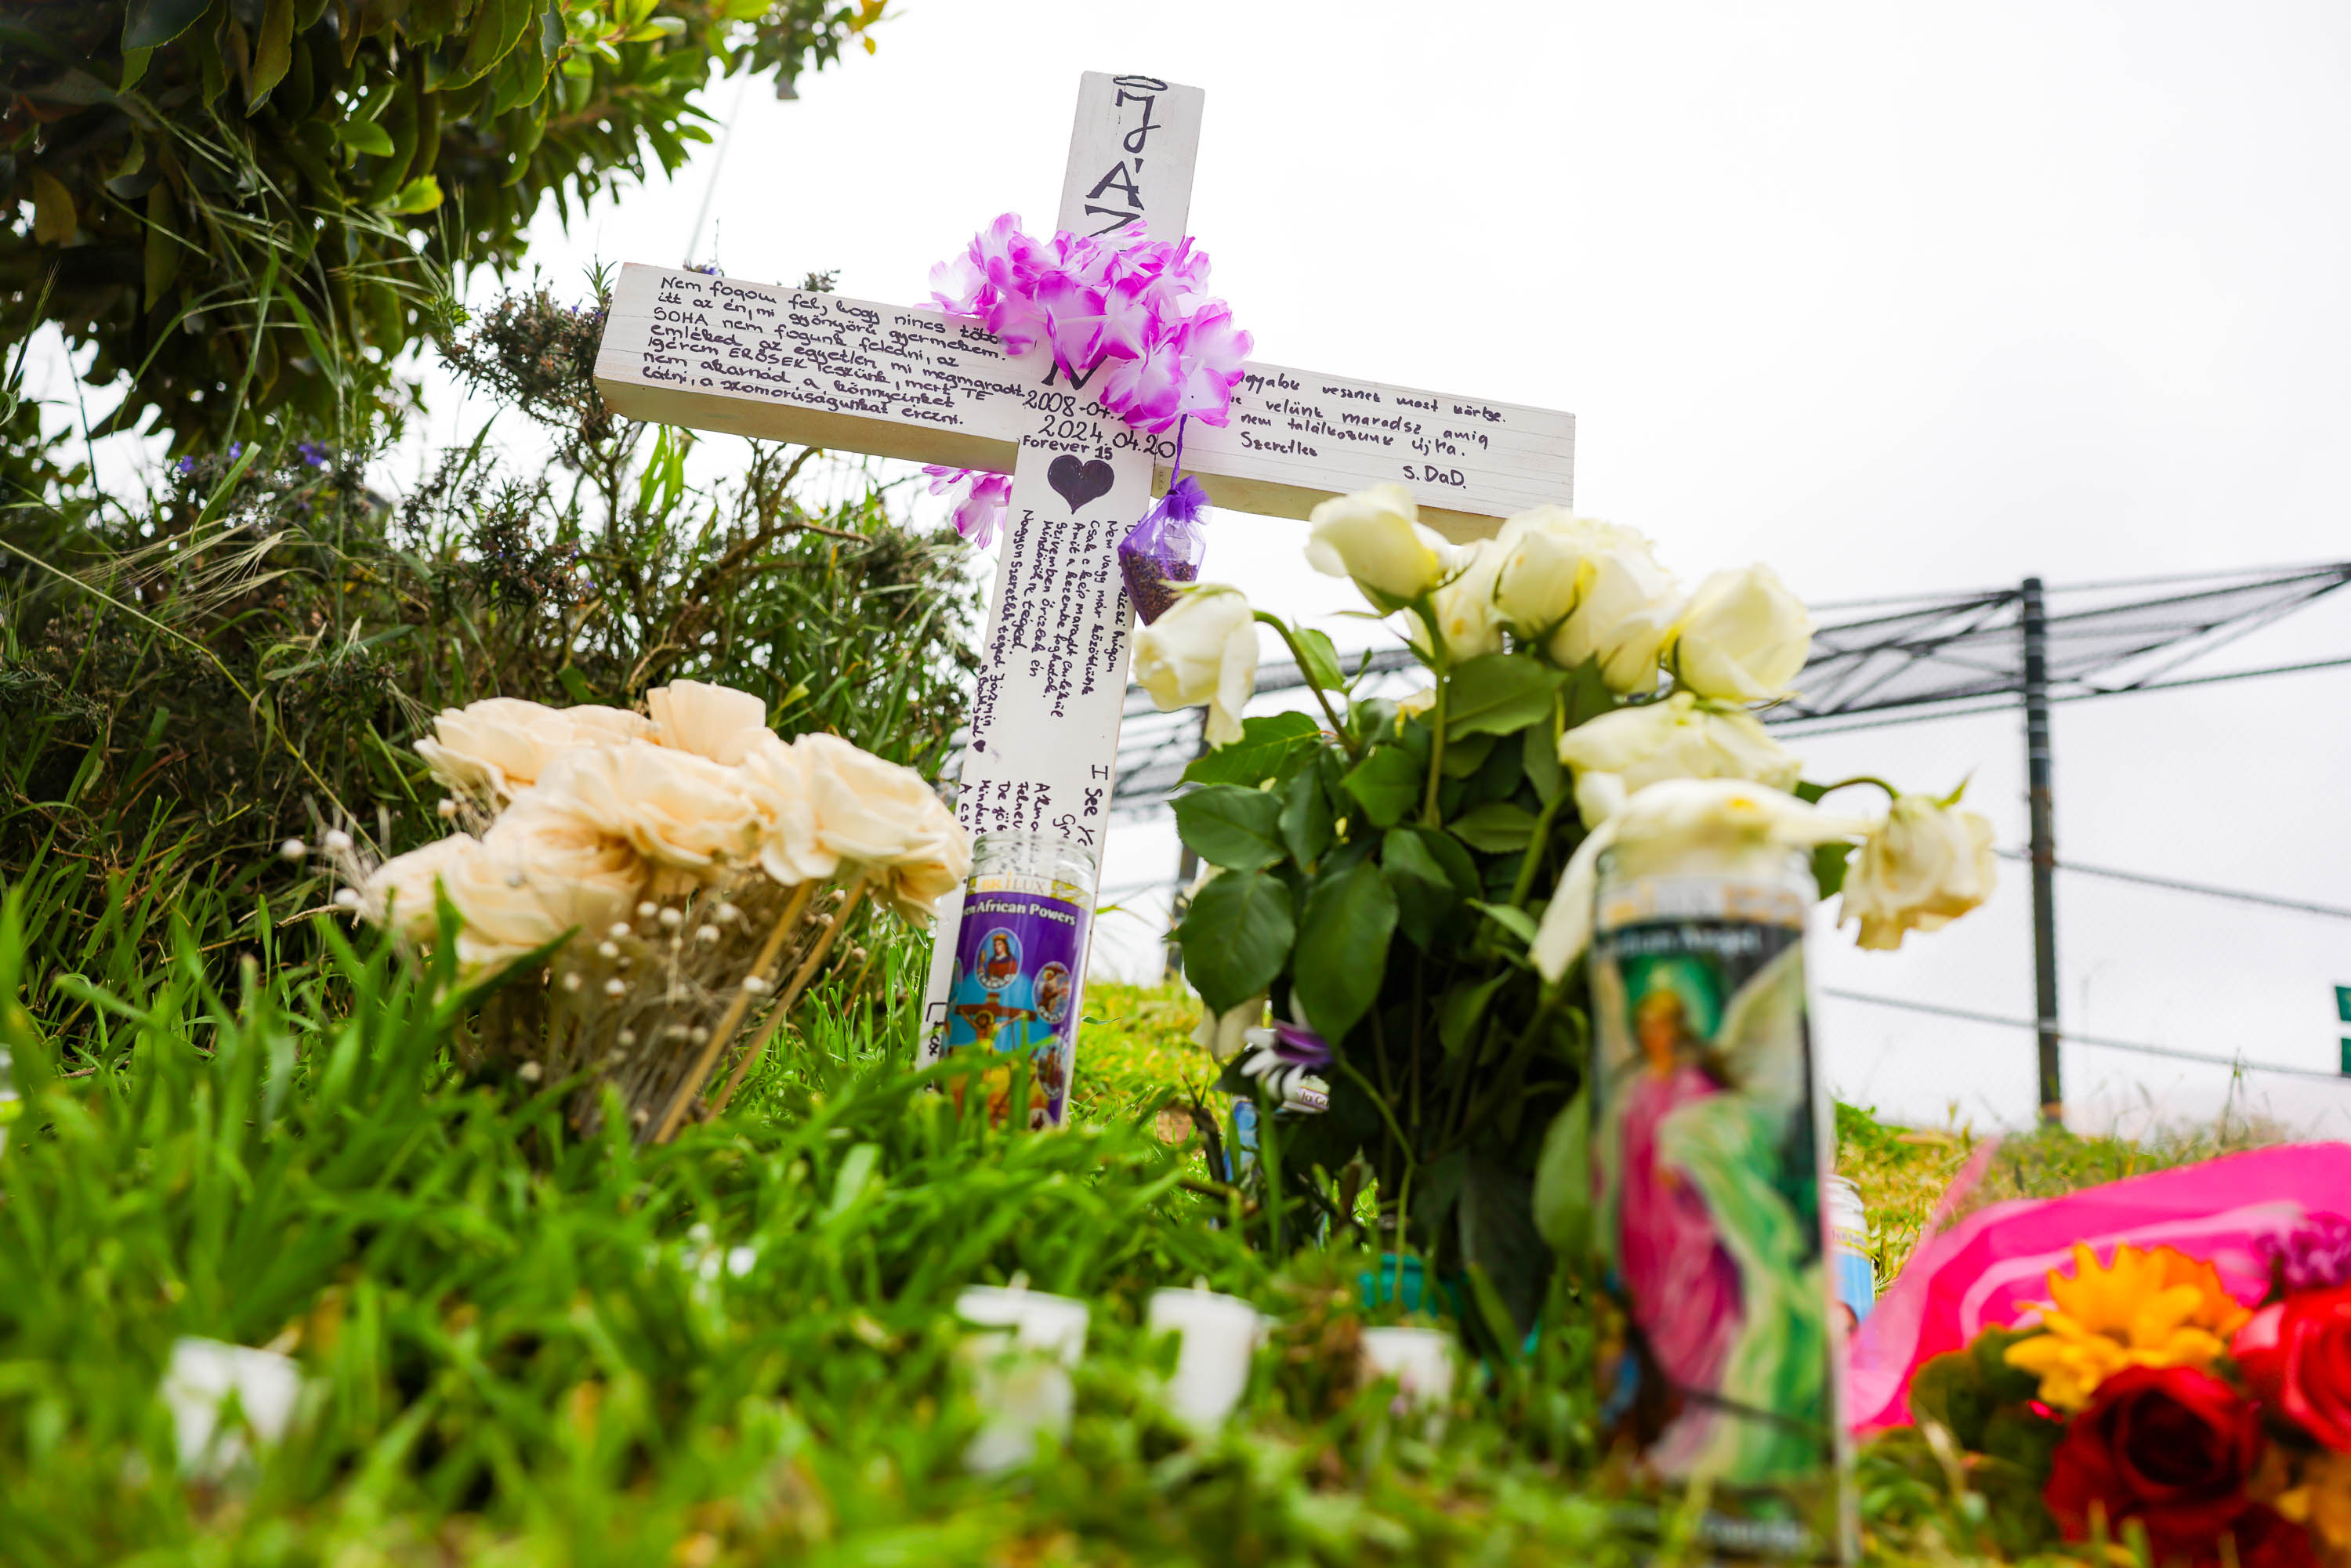 A makeshift roadside memorial featuring a white cross with flowers, candles, and handwritten messages.